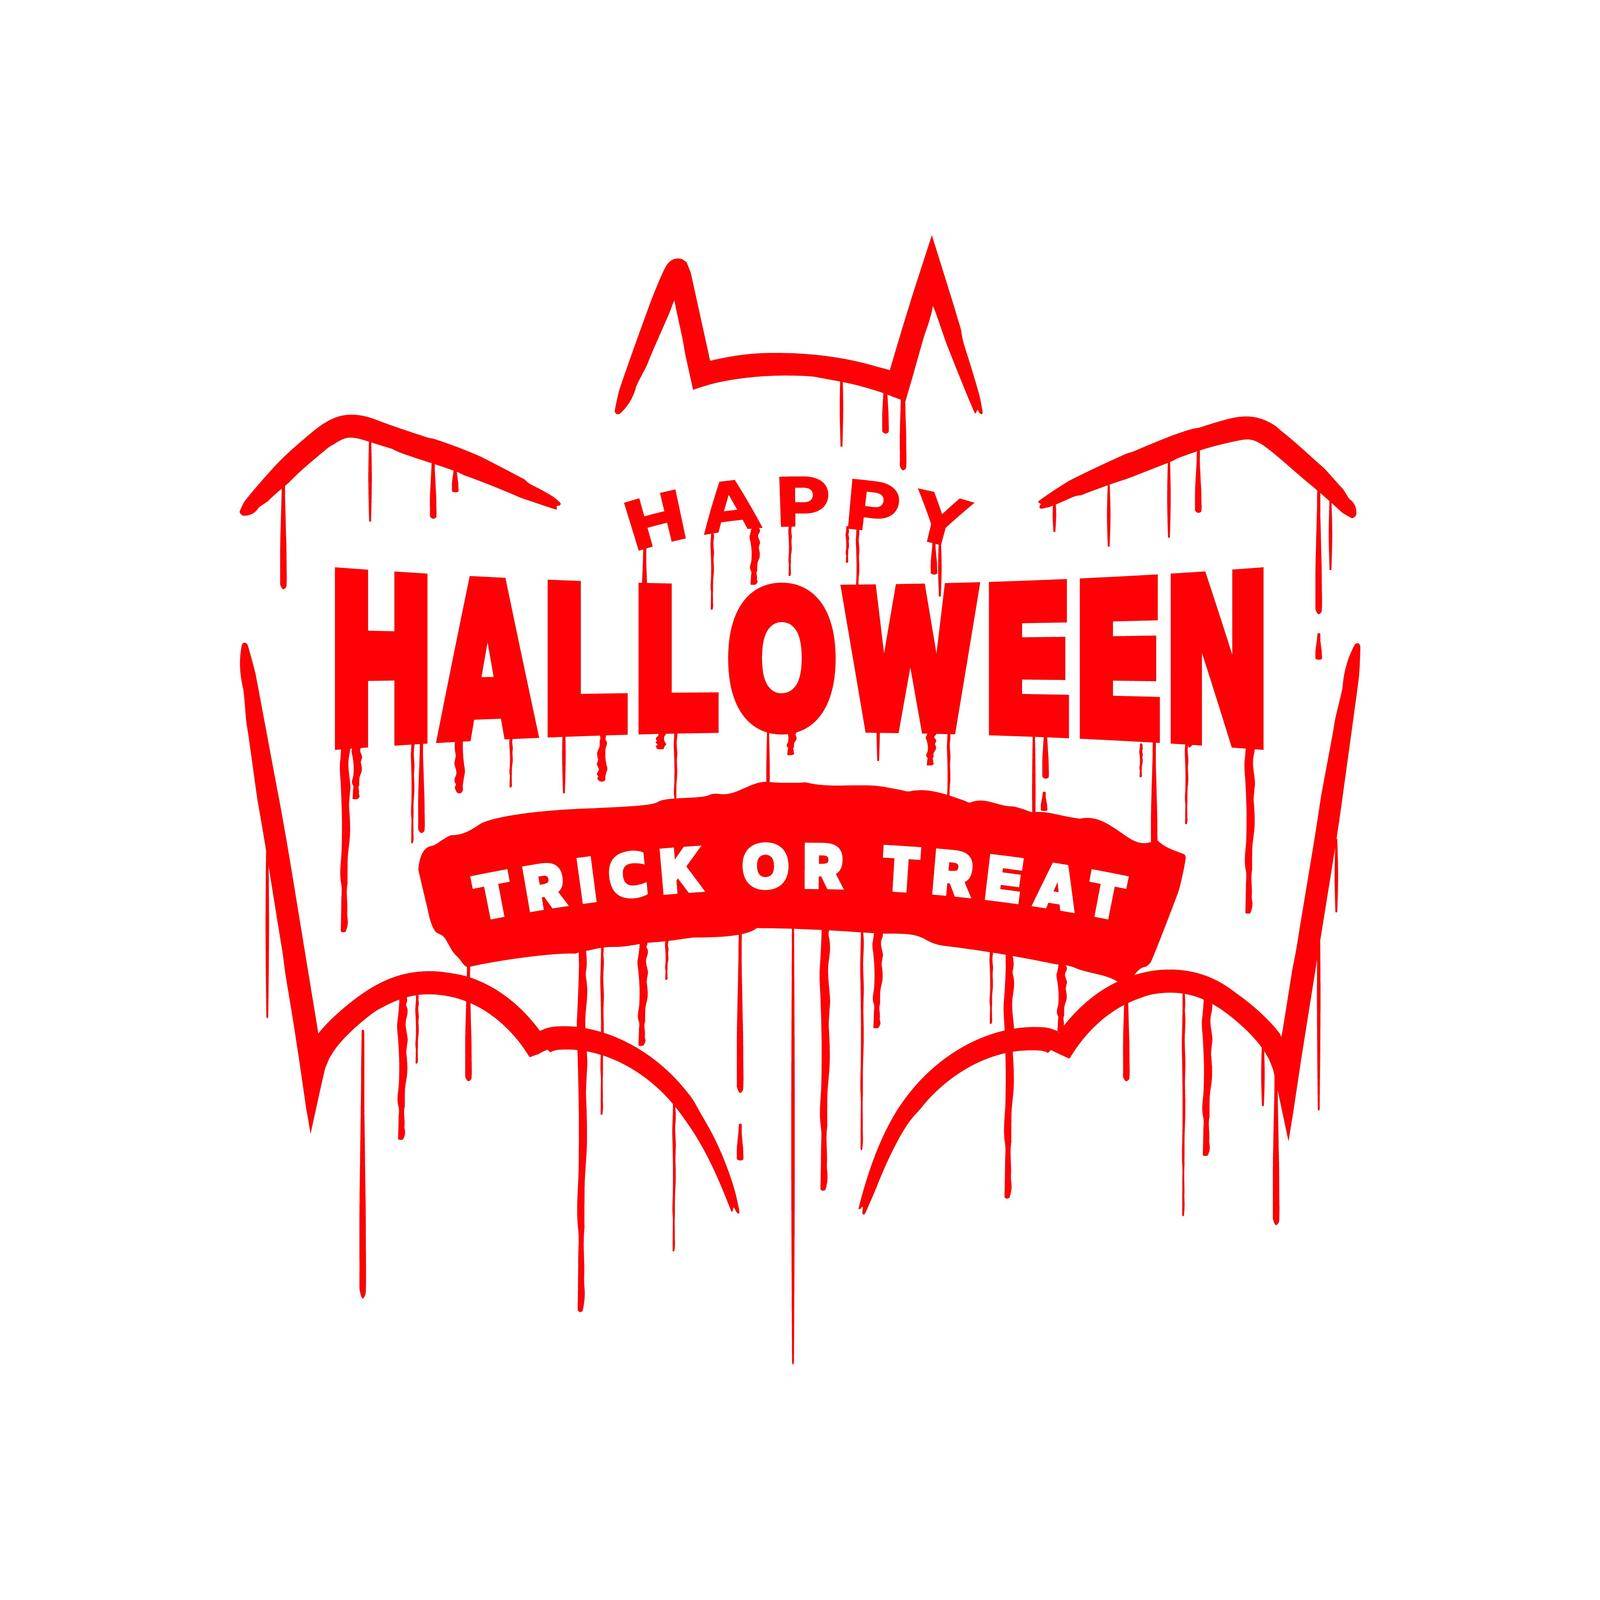 Happy halloween trick or treat  lettering. Happy halloween text banner. by windawake